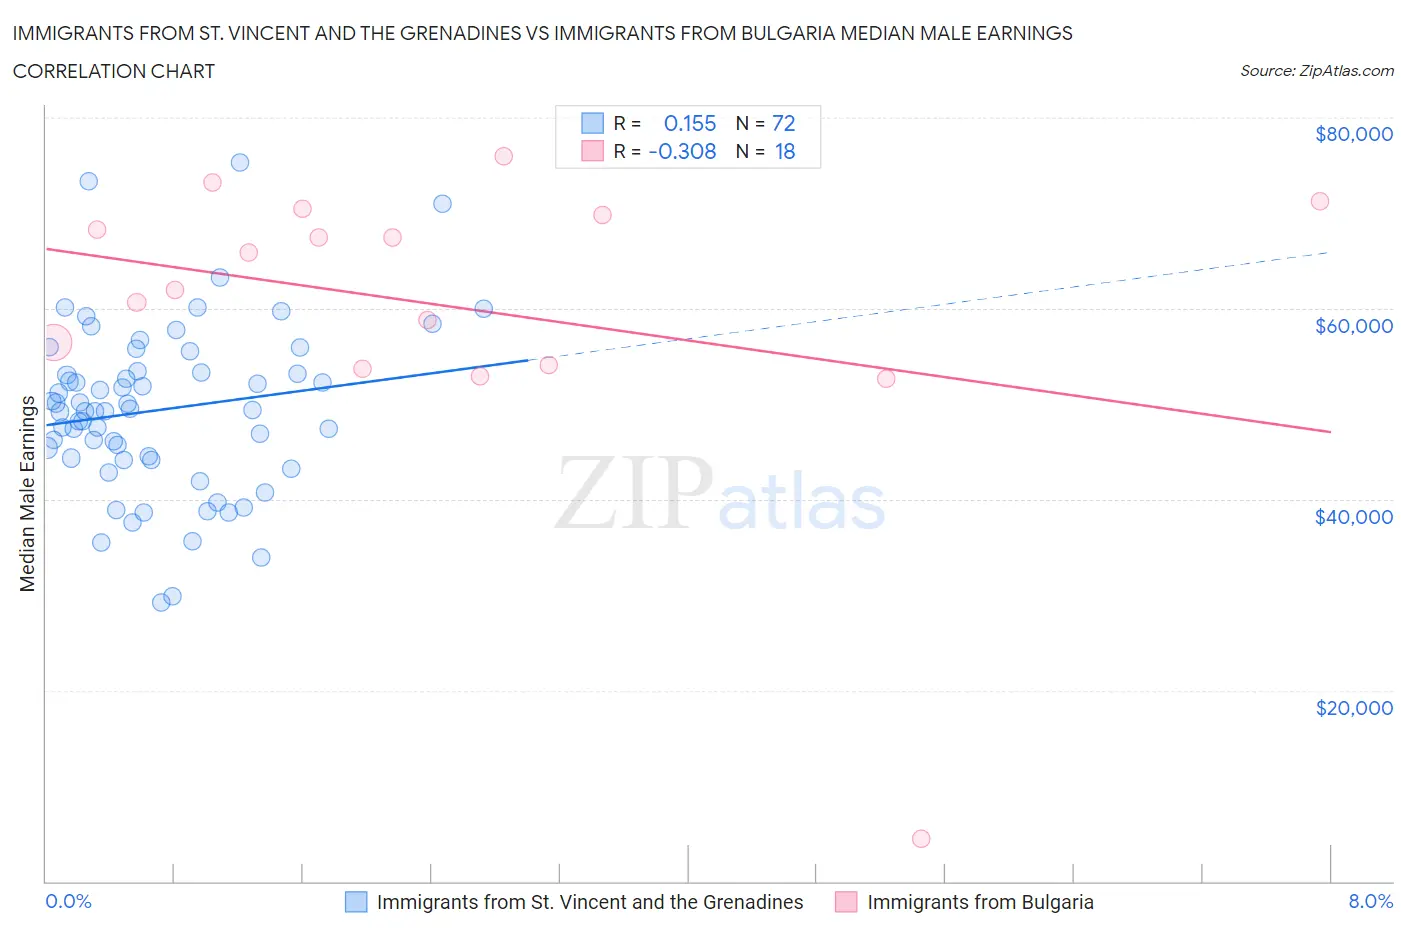 Immigrants from St. Vincent and the Grenadines vs Immigrants from Bulgaria Median Male Earnings